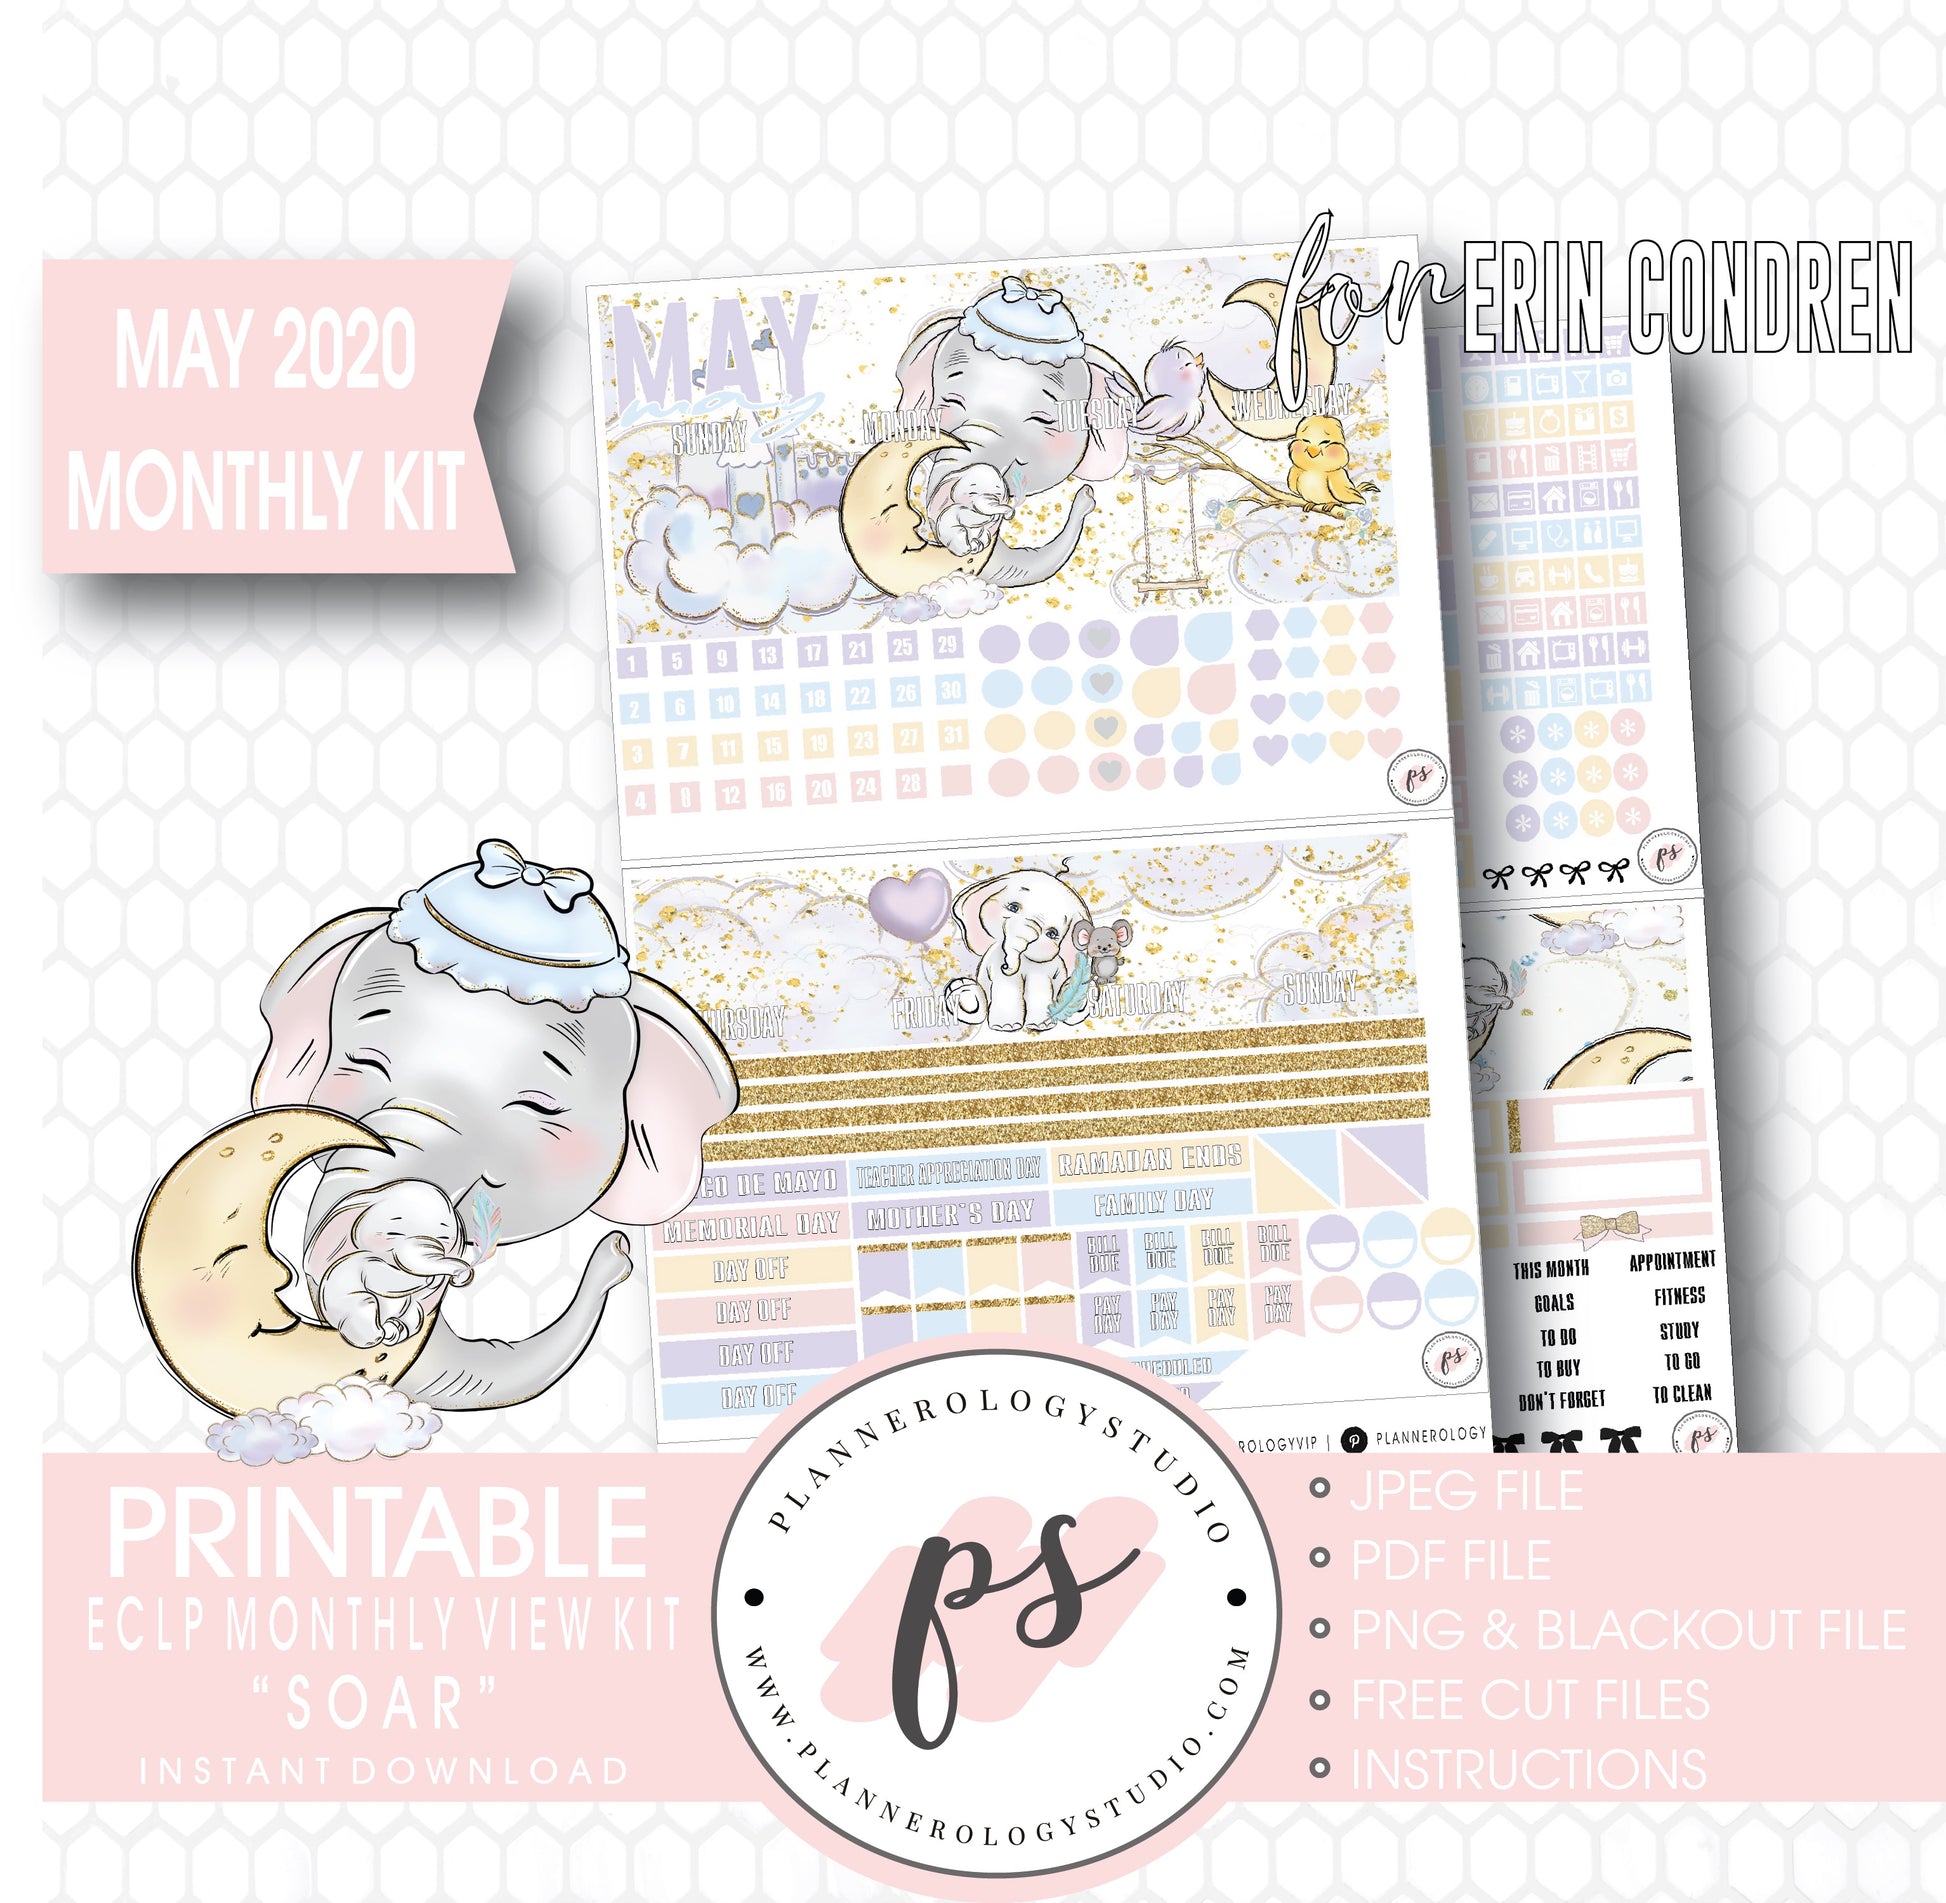 Soar (Dumbo Inspired) May 2020 Monthly View Kit Digital Printable Planner Stickers (for use with Erin Condren) - Plannerologystudio